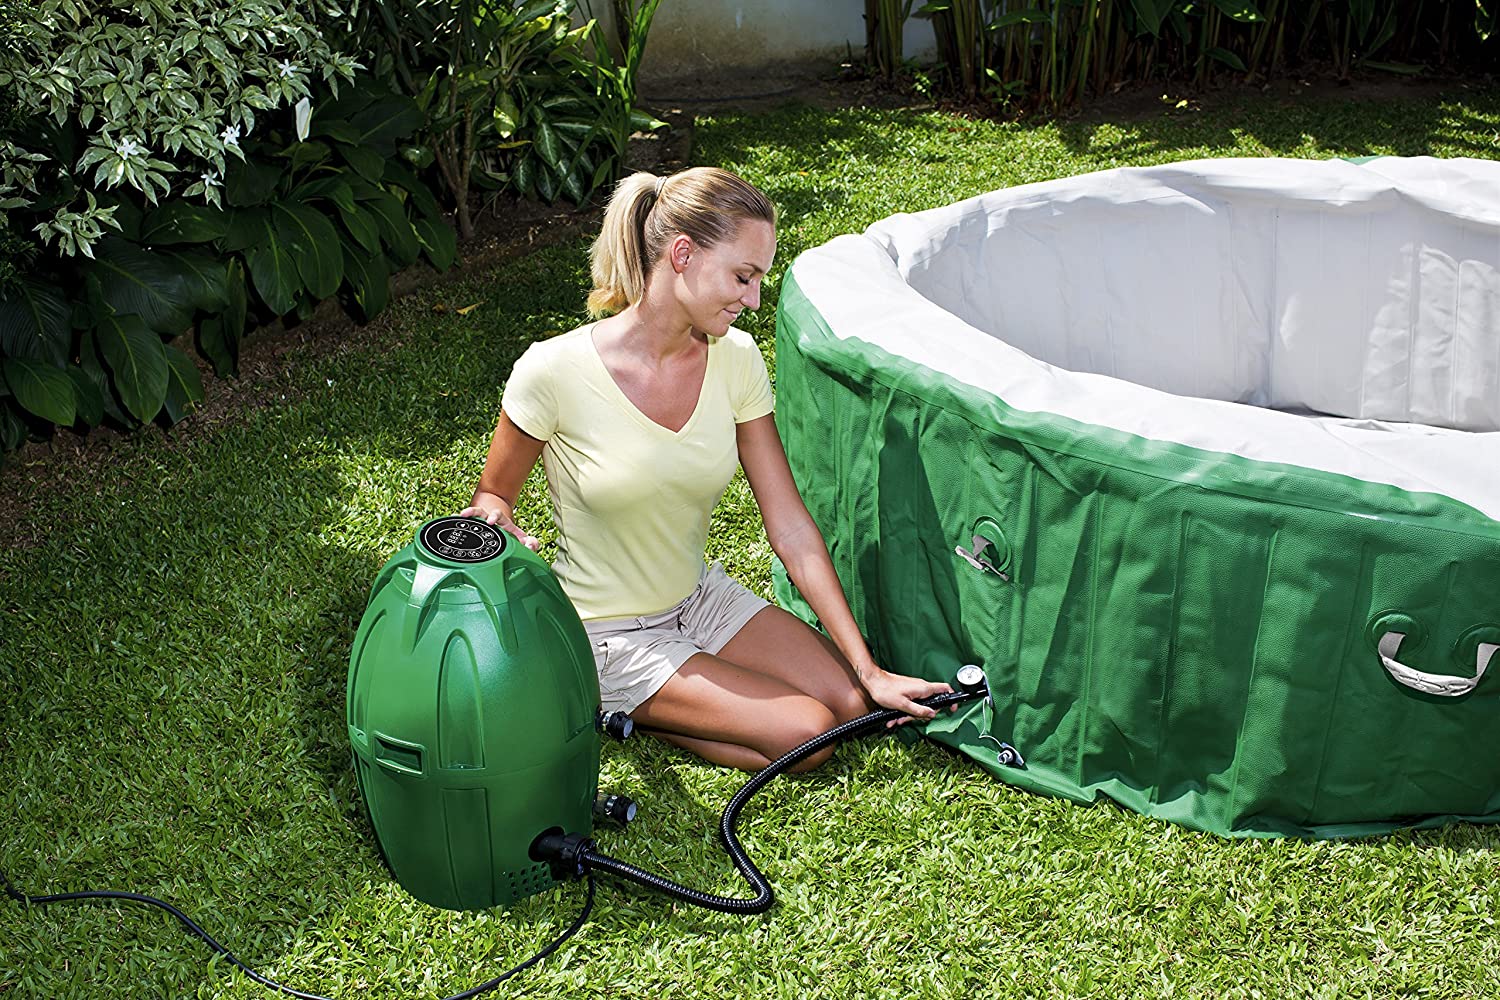 A person kneeling down in a yard while using a pump to blow up an inflatable hot tub.